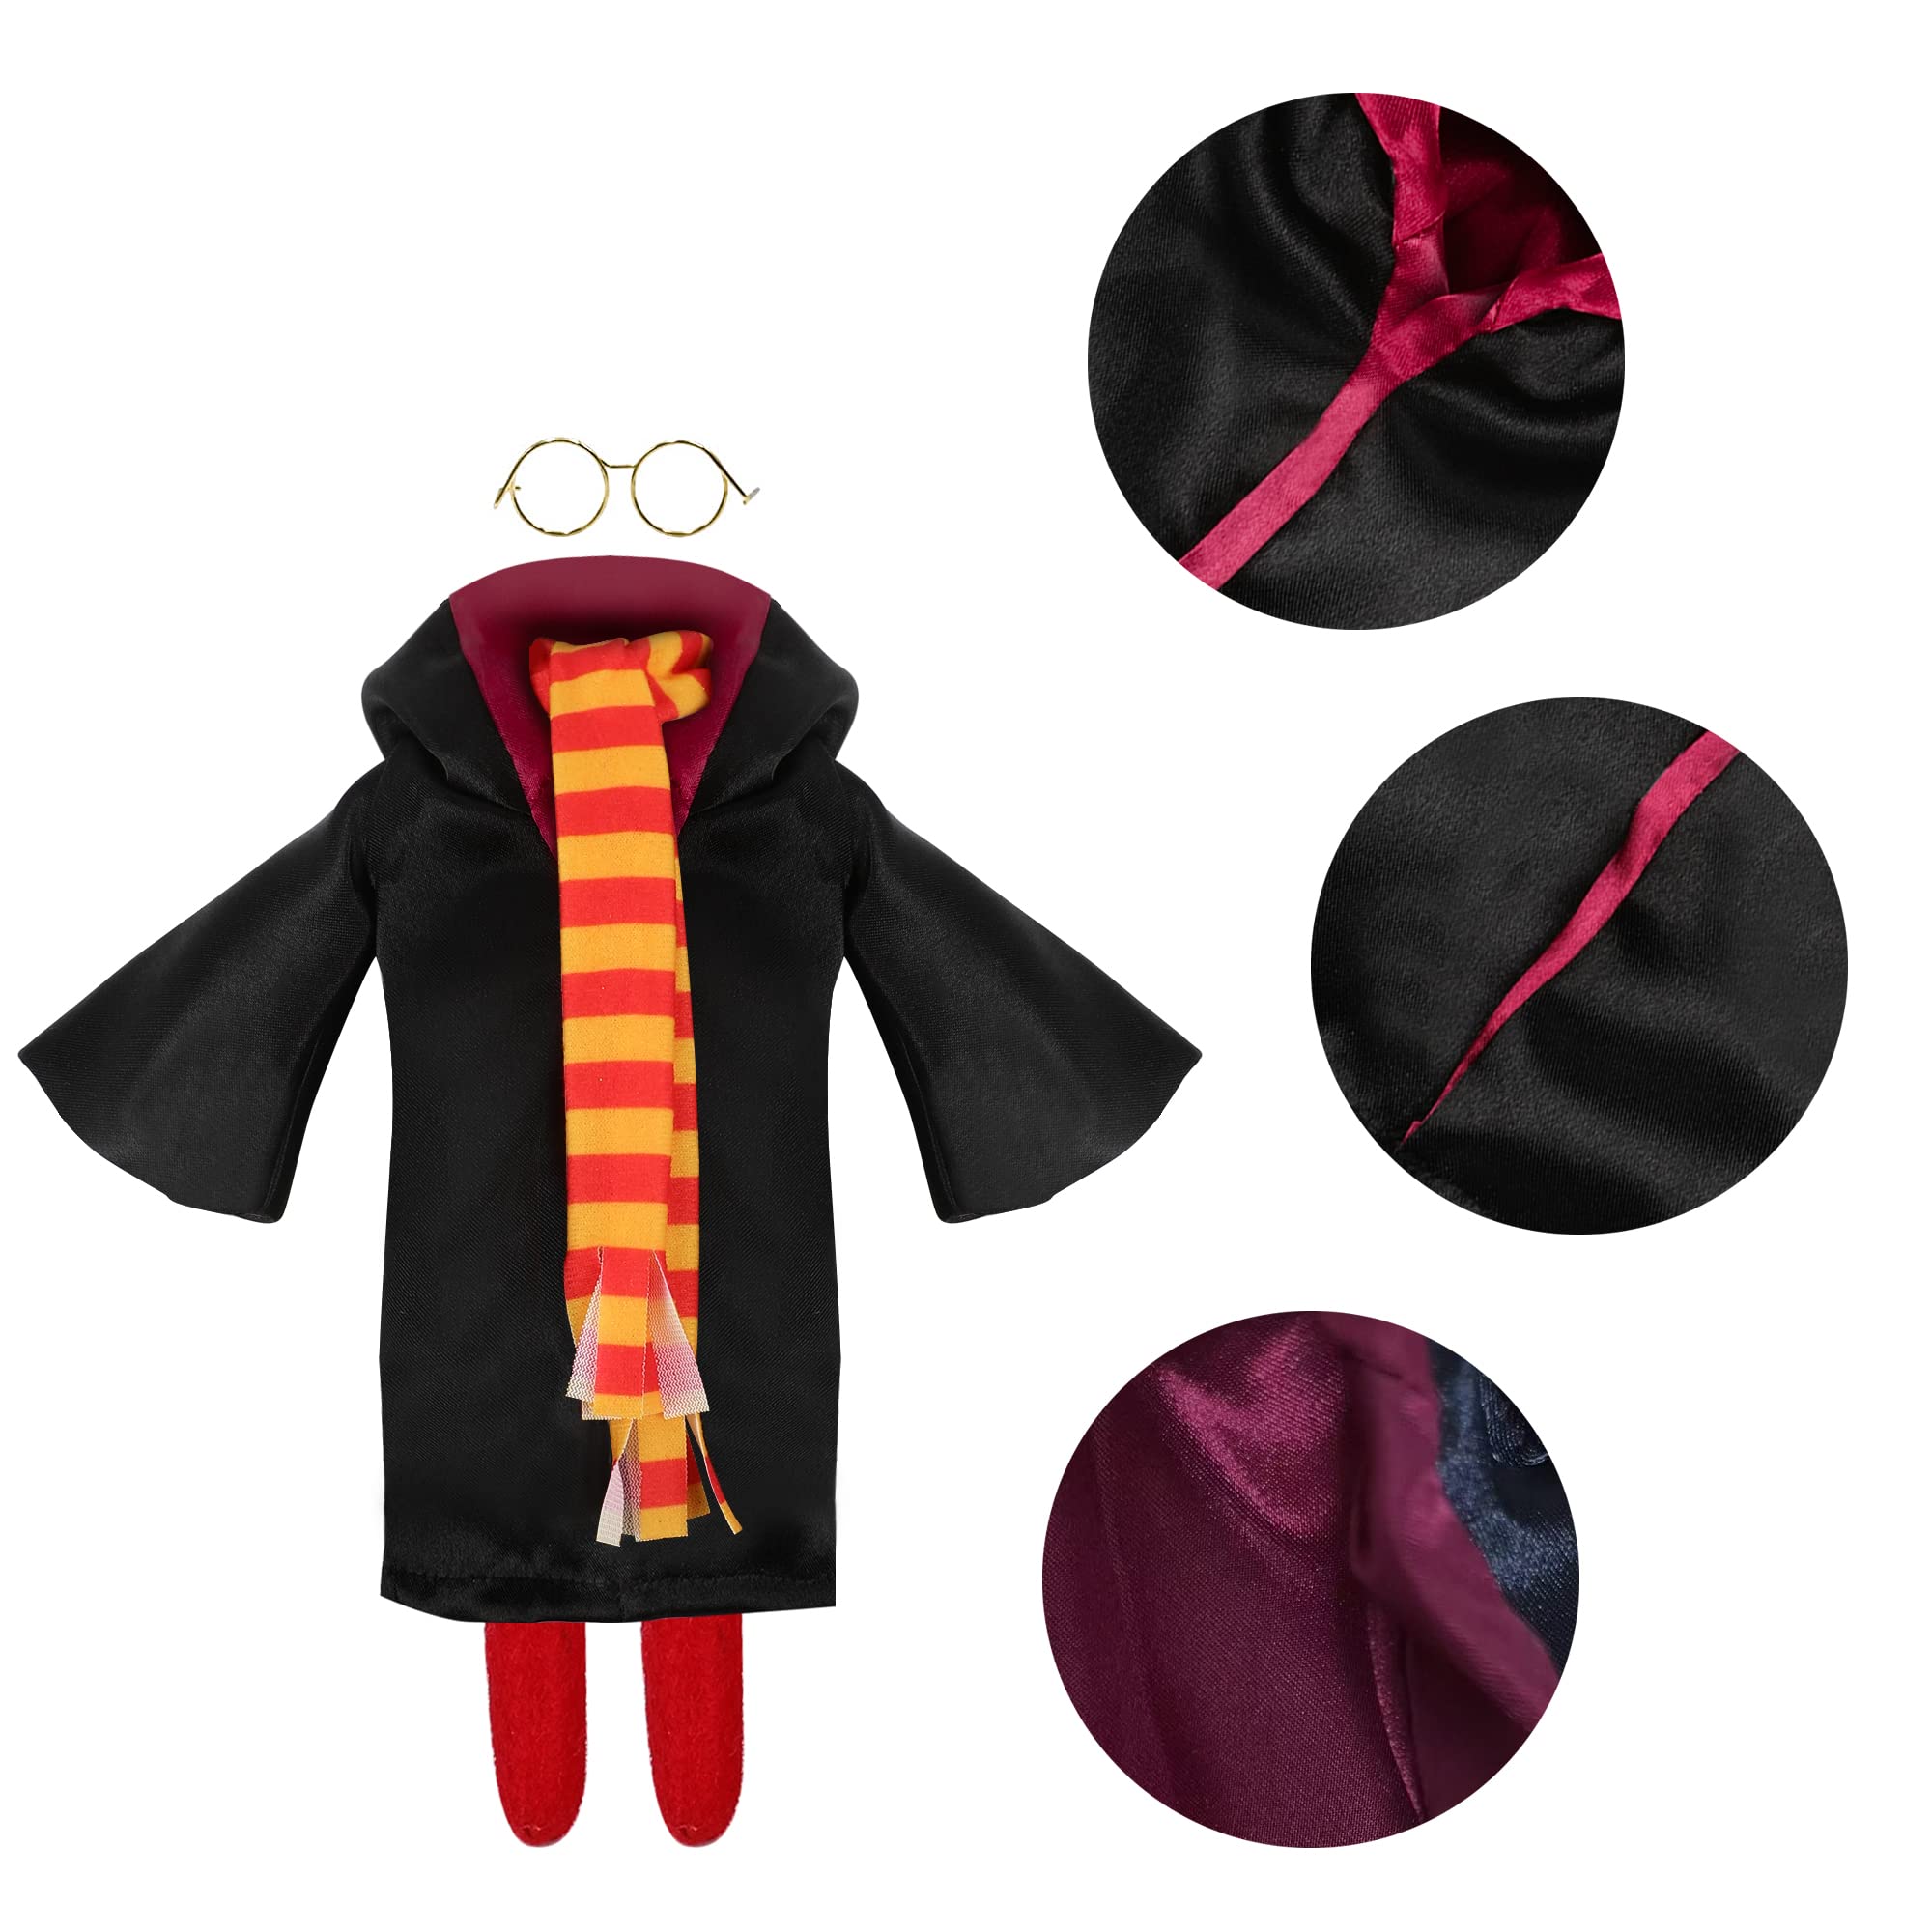 Christmas Elf Doll Accessories Wizard Couture Accessories Set 3PCS Wizard Christmas Doll Clothing Costume Accessories Including Wizard Theme Robe Scarf and Glasses for Elf Doll